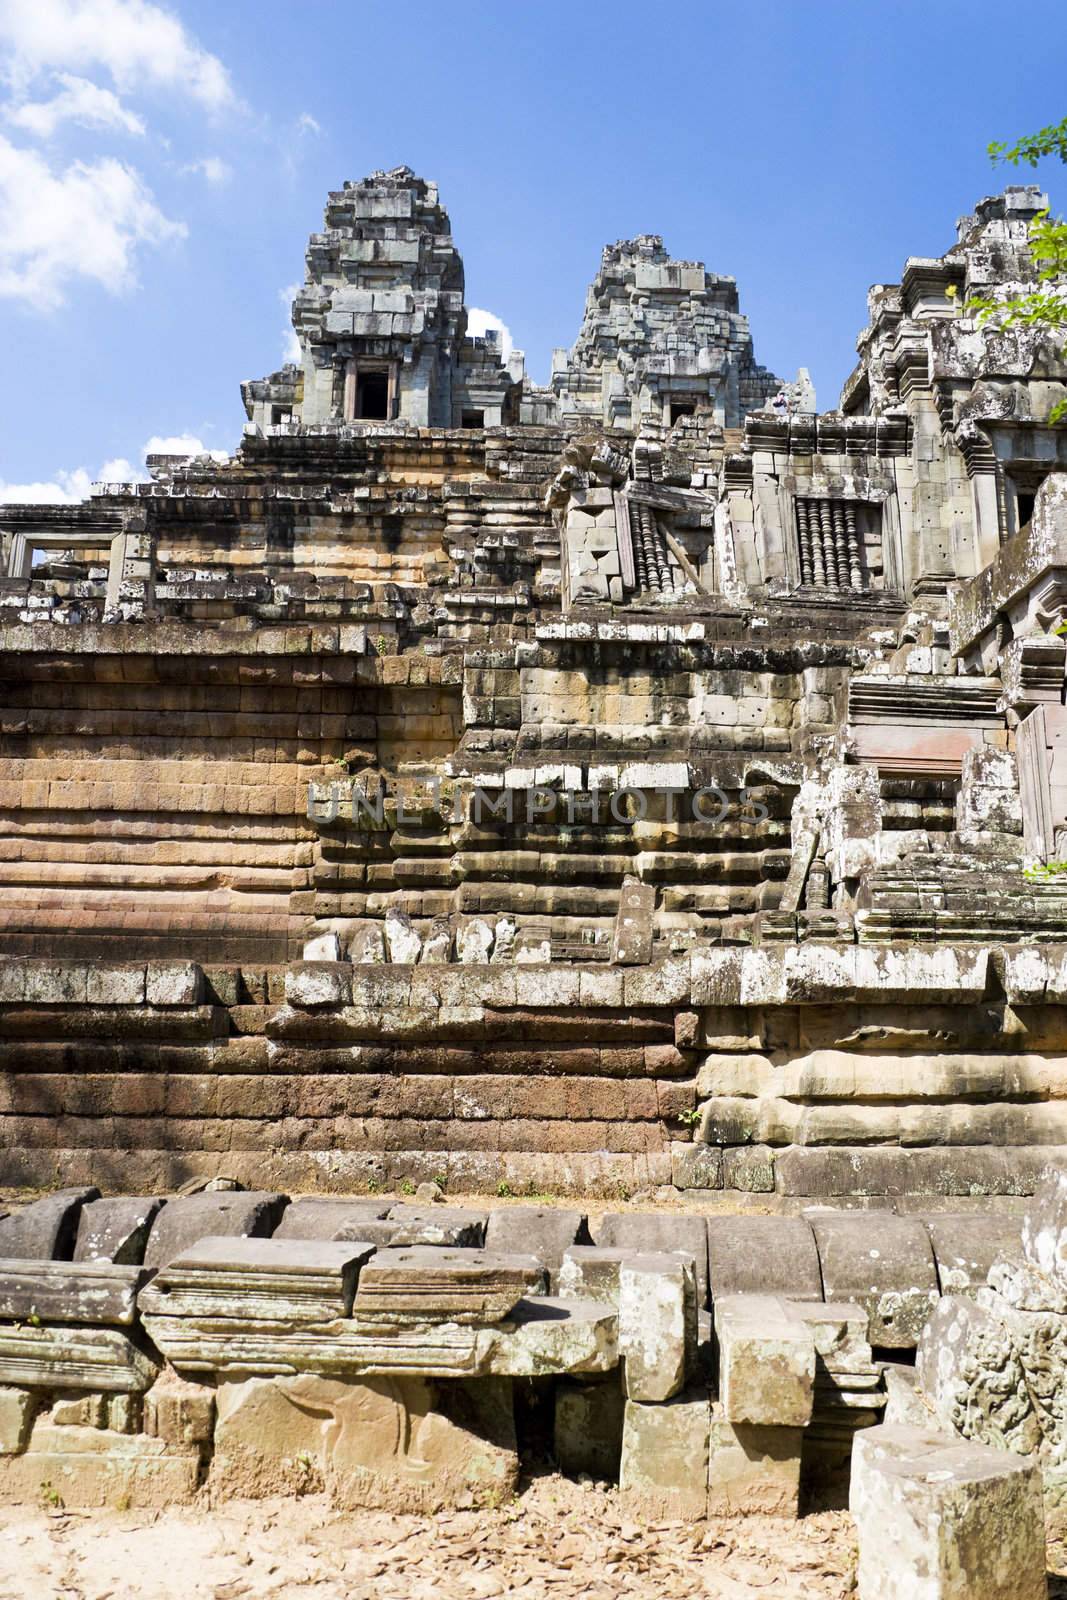 Image of UNESCO's World Heritage Site of Ta Keo Temple, located at Siem Reap, Cambodia.